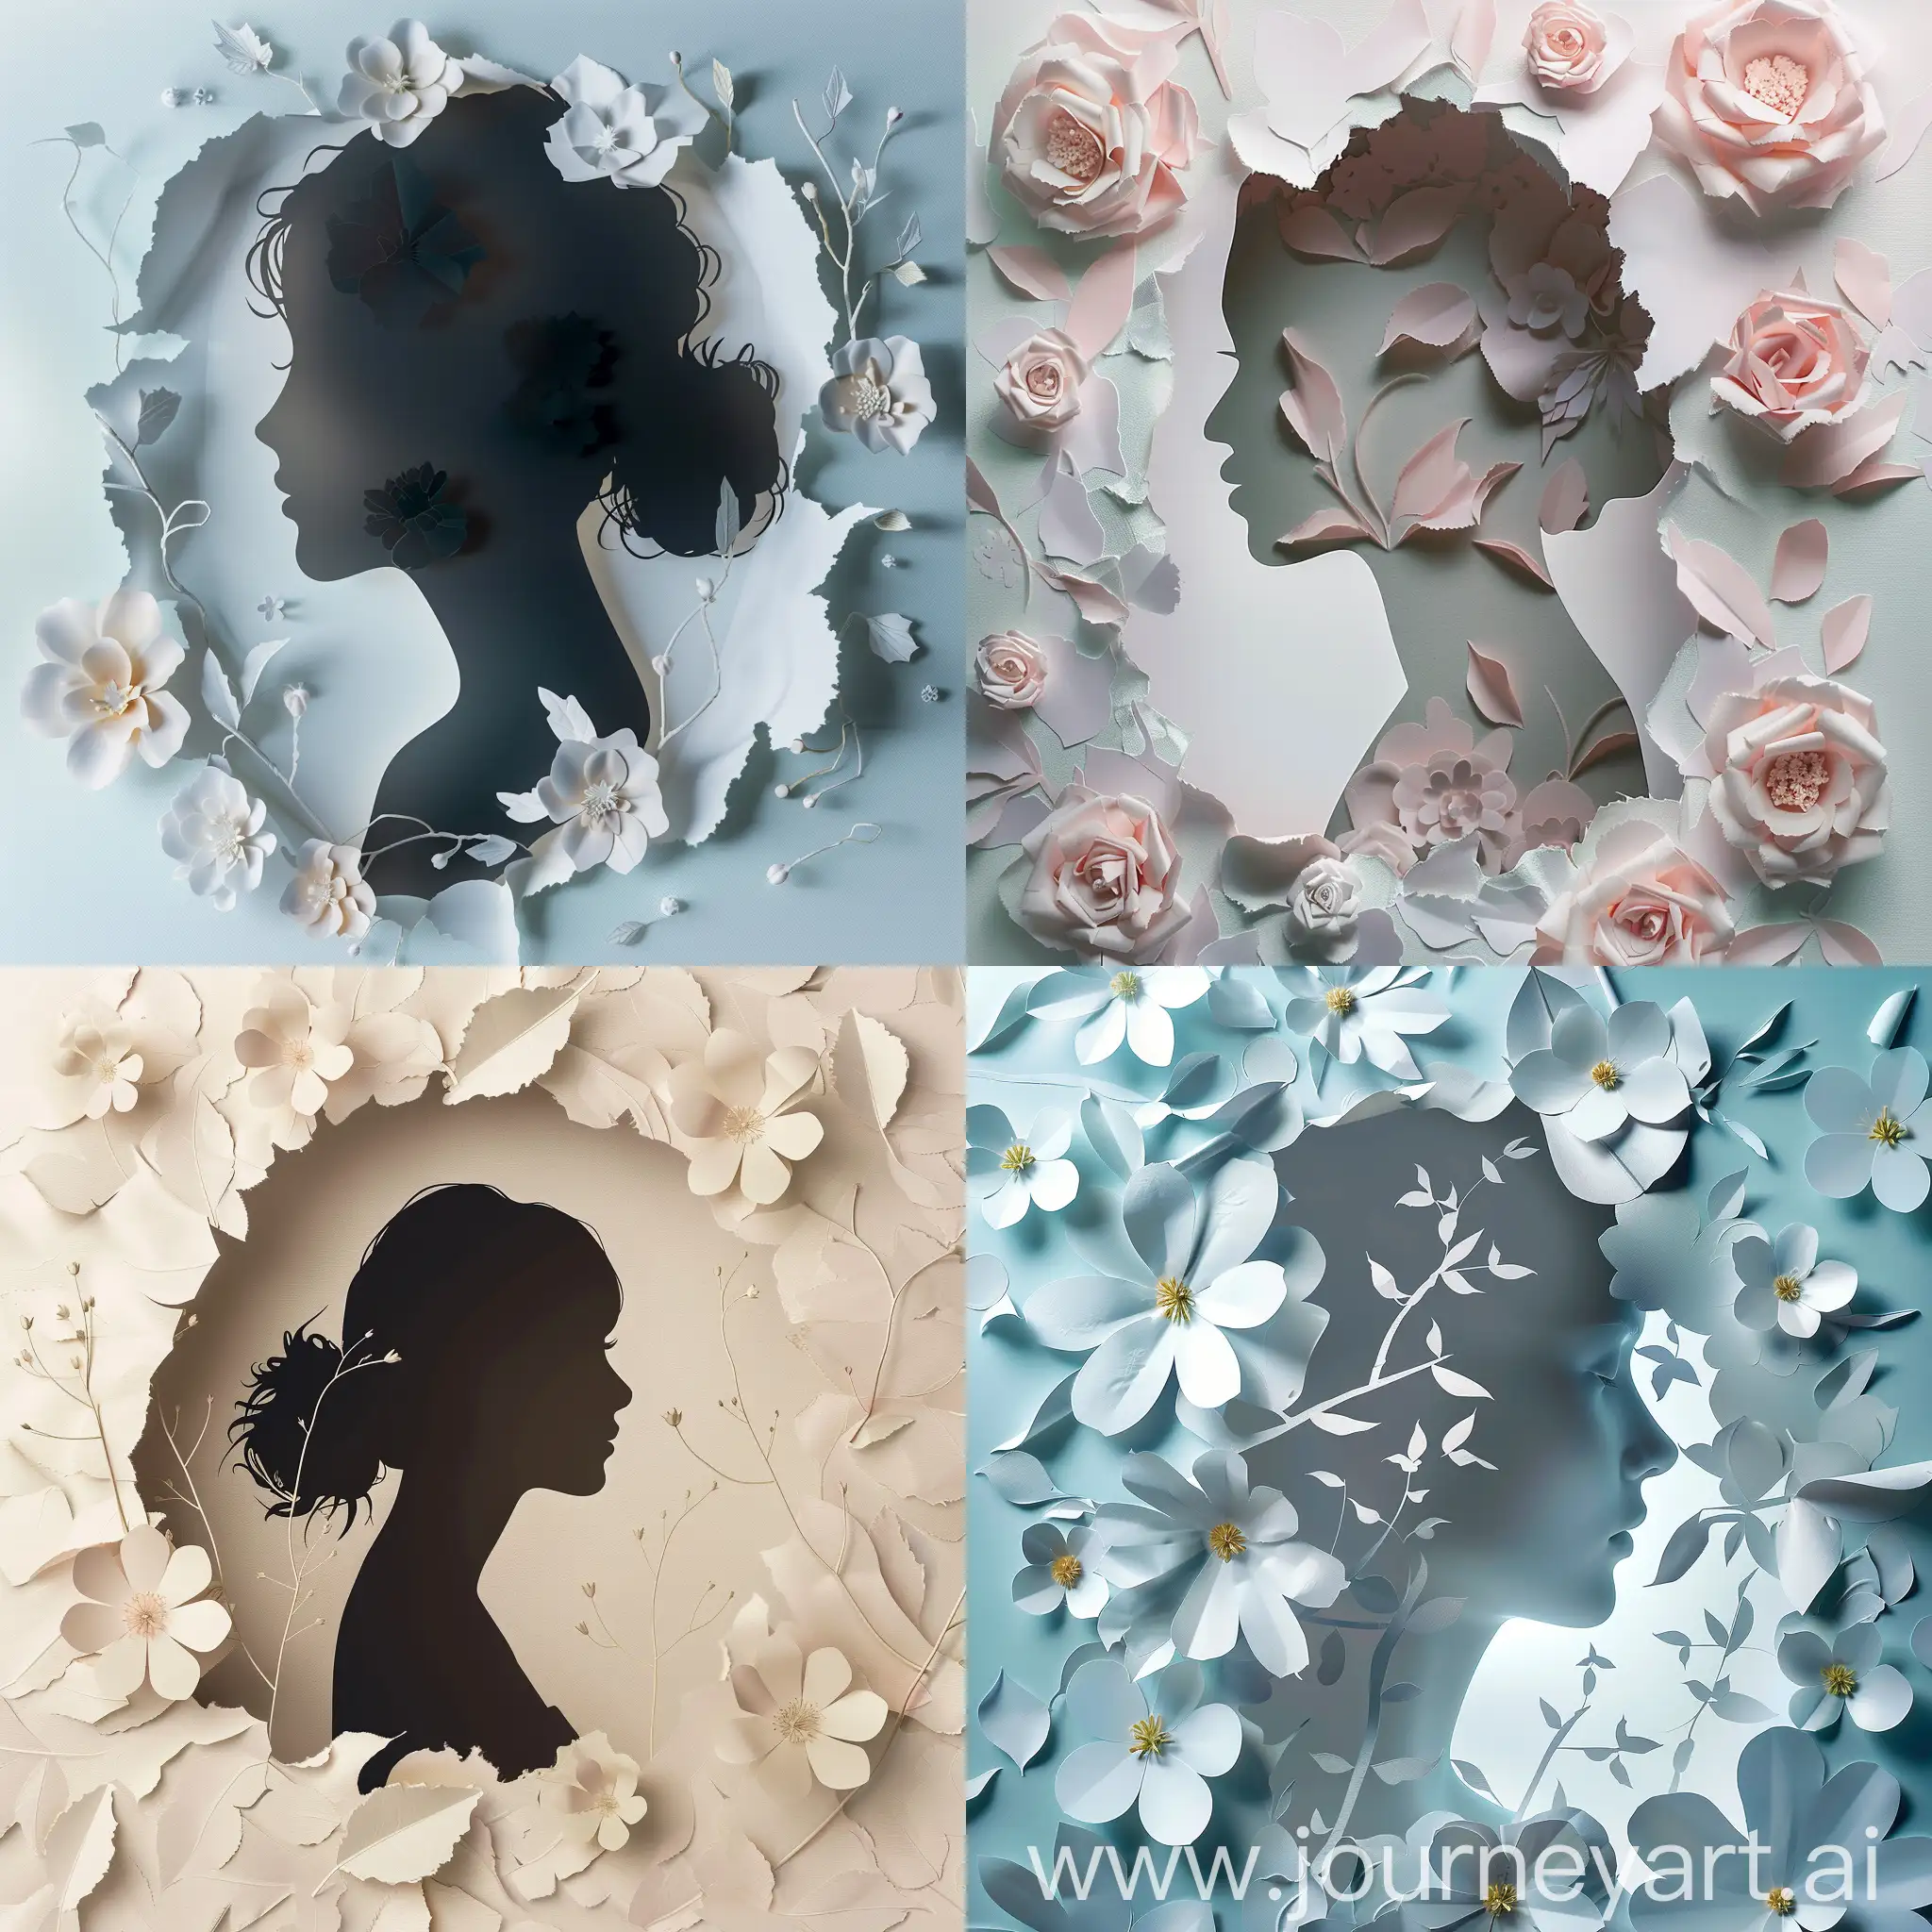 Ethereal-Female-Silhouette-Embraced-by-Floral-Paper-Art